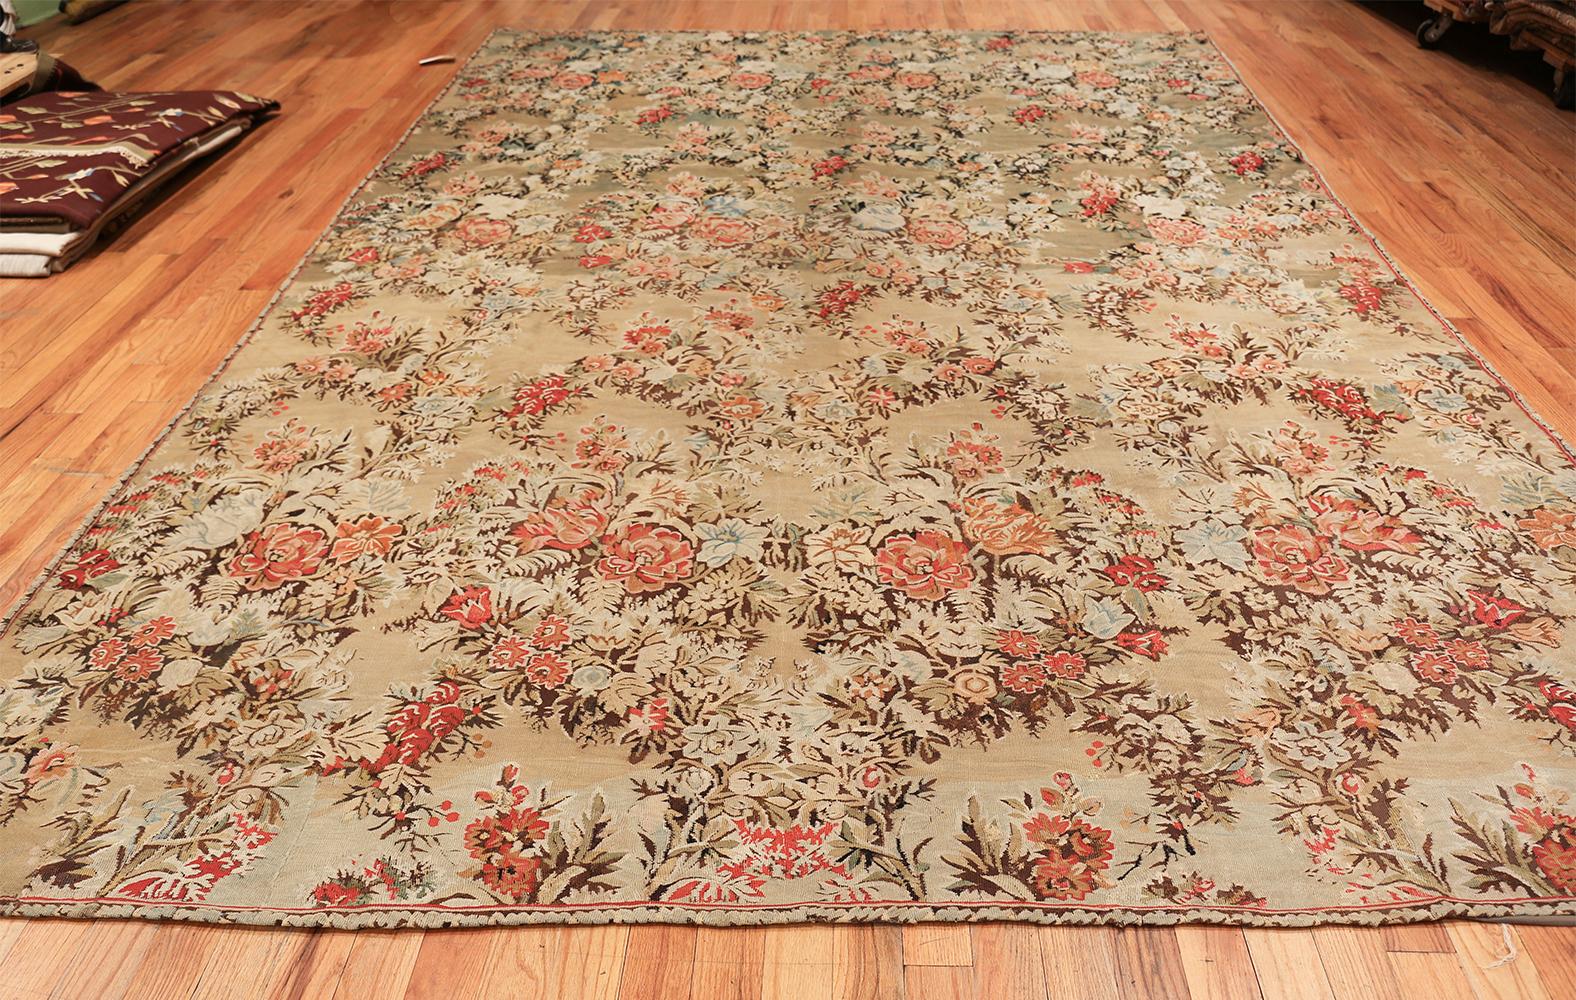 Beautiful antique Bessarabian Kilim rug, country of origin: Romania, date circa mid-19th century. Size: 9 ft. x 12 ft. (2.74 m x 3.66 m)

This sublimely beautiful antique rug, a Bessarabian Kilim from nineteenth century Romania, is a positively